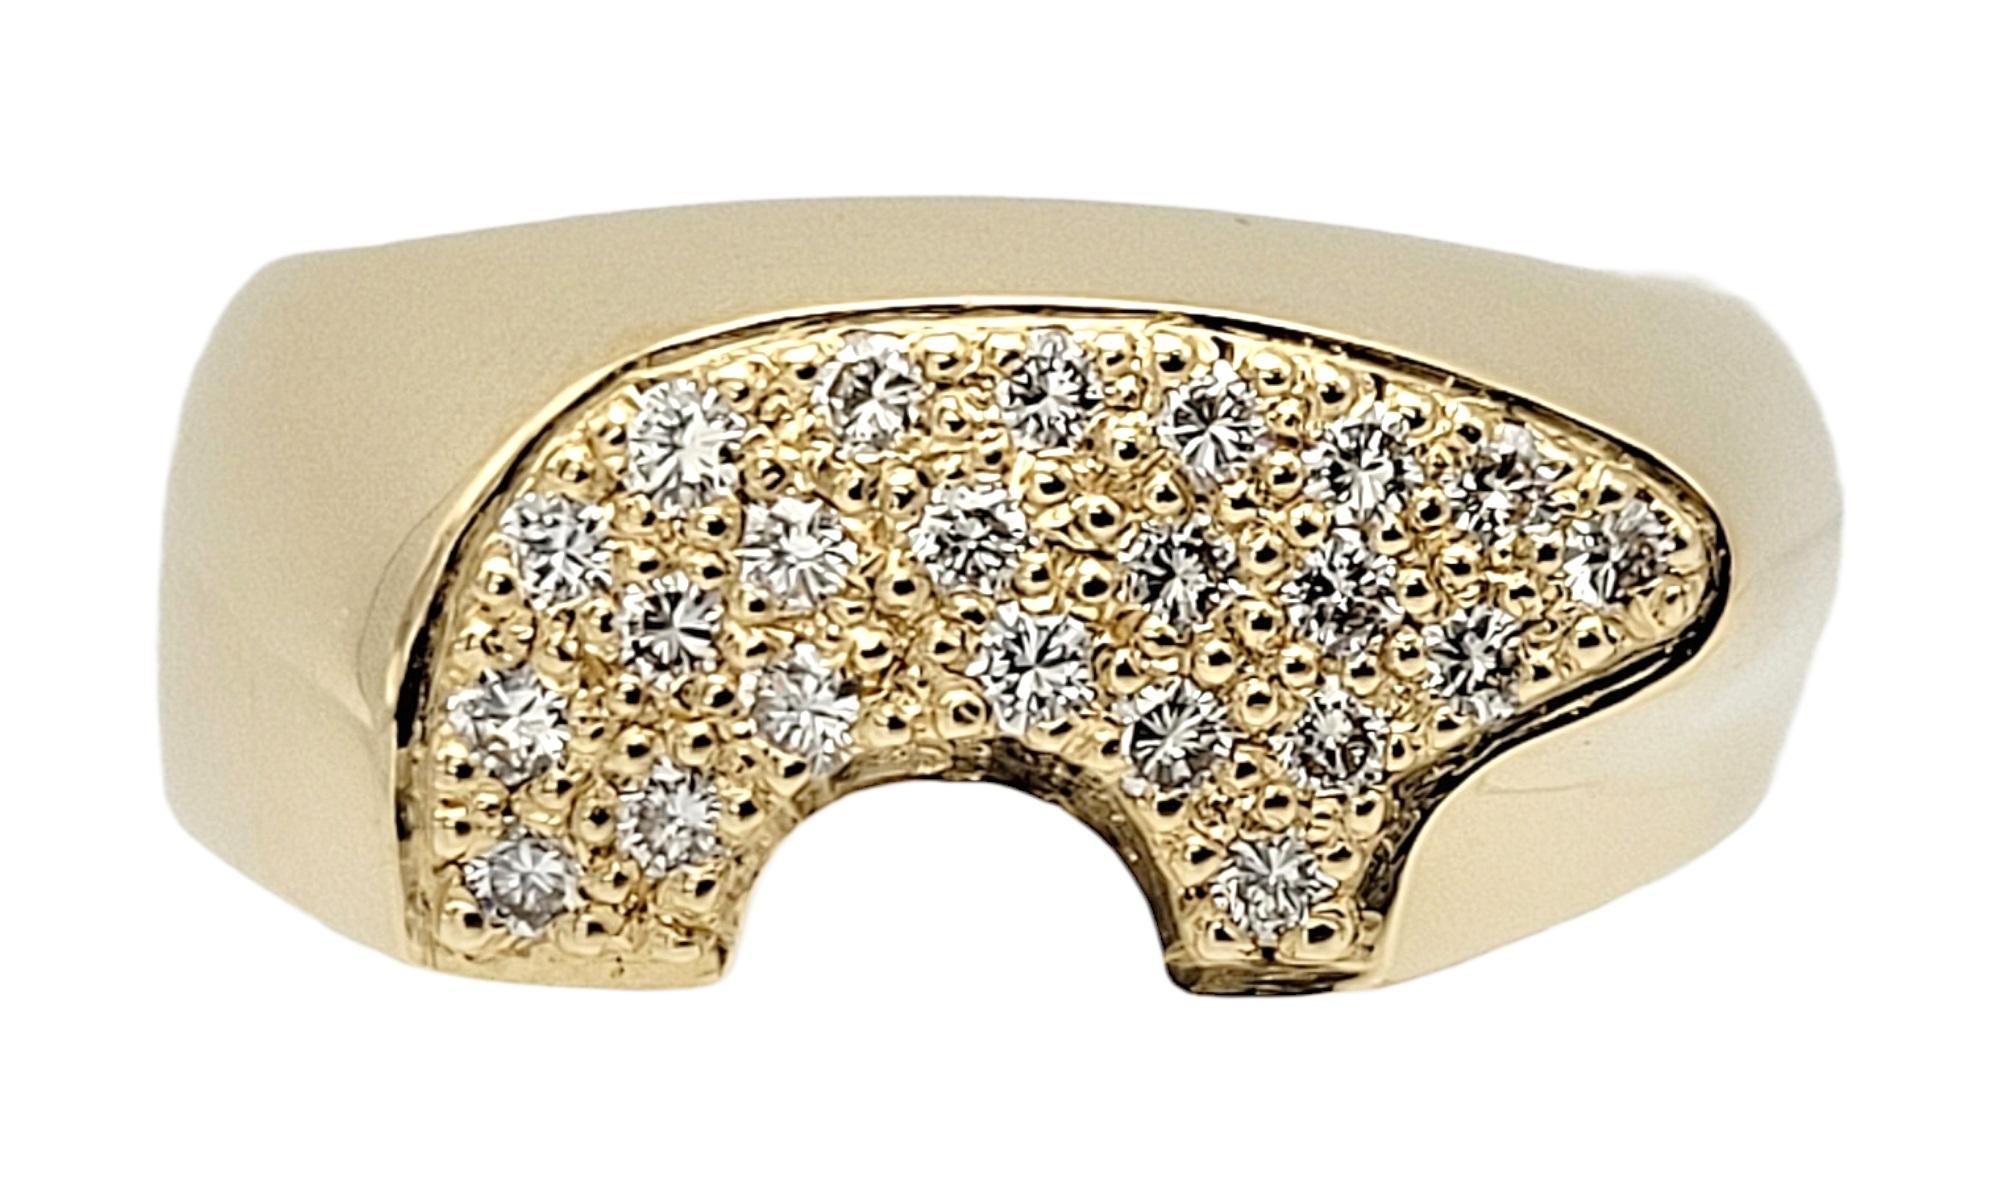 Ring size: 7.5

Recognizable signet style band ring designed by The Golden Bear.  Founded in Vail, Colorado in 1975, the Golden Bear store's distinctive little bruin would become recognized as 